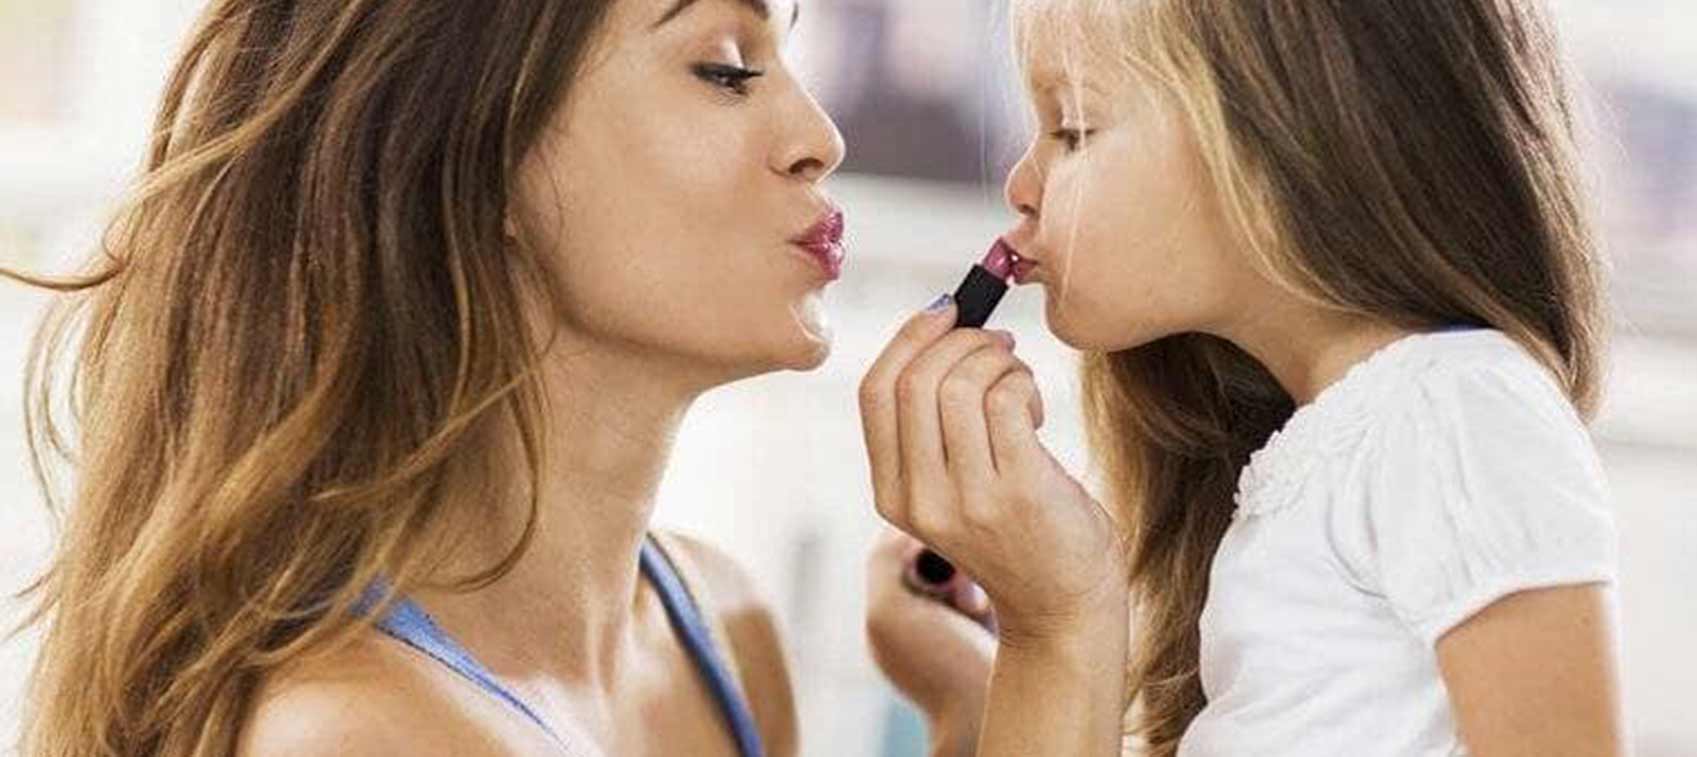 Love Your Lips: Smart Skin Care Strategies for Your Kisser